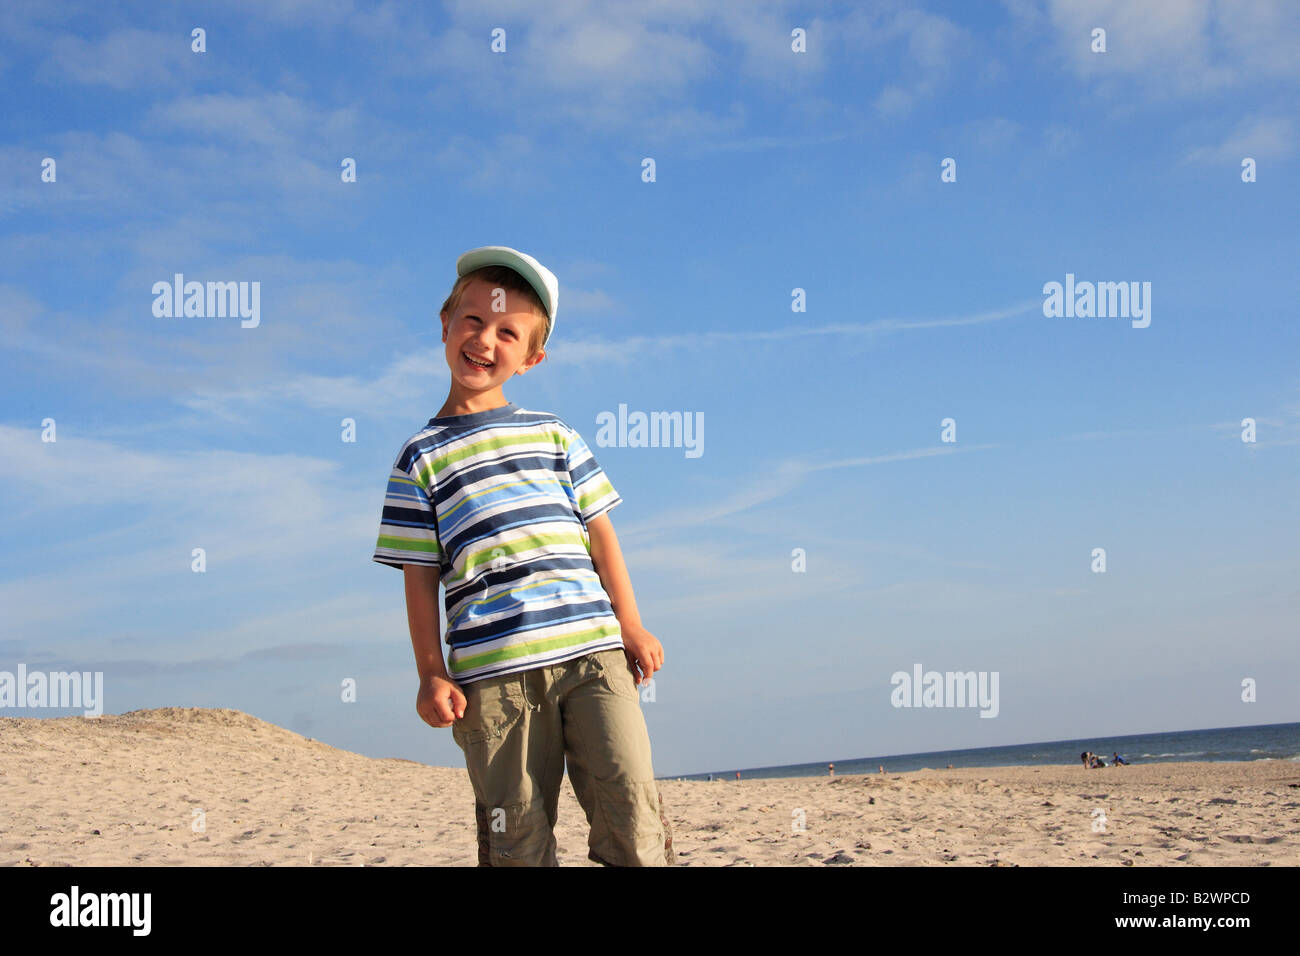 Smiling boy on a beach Banque D'Images